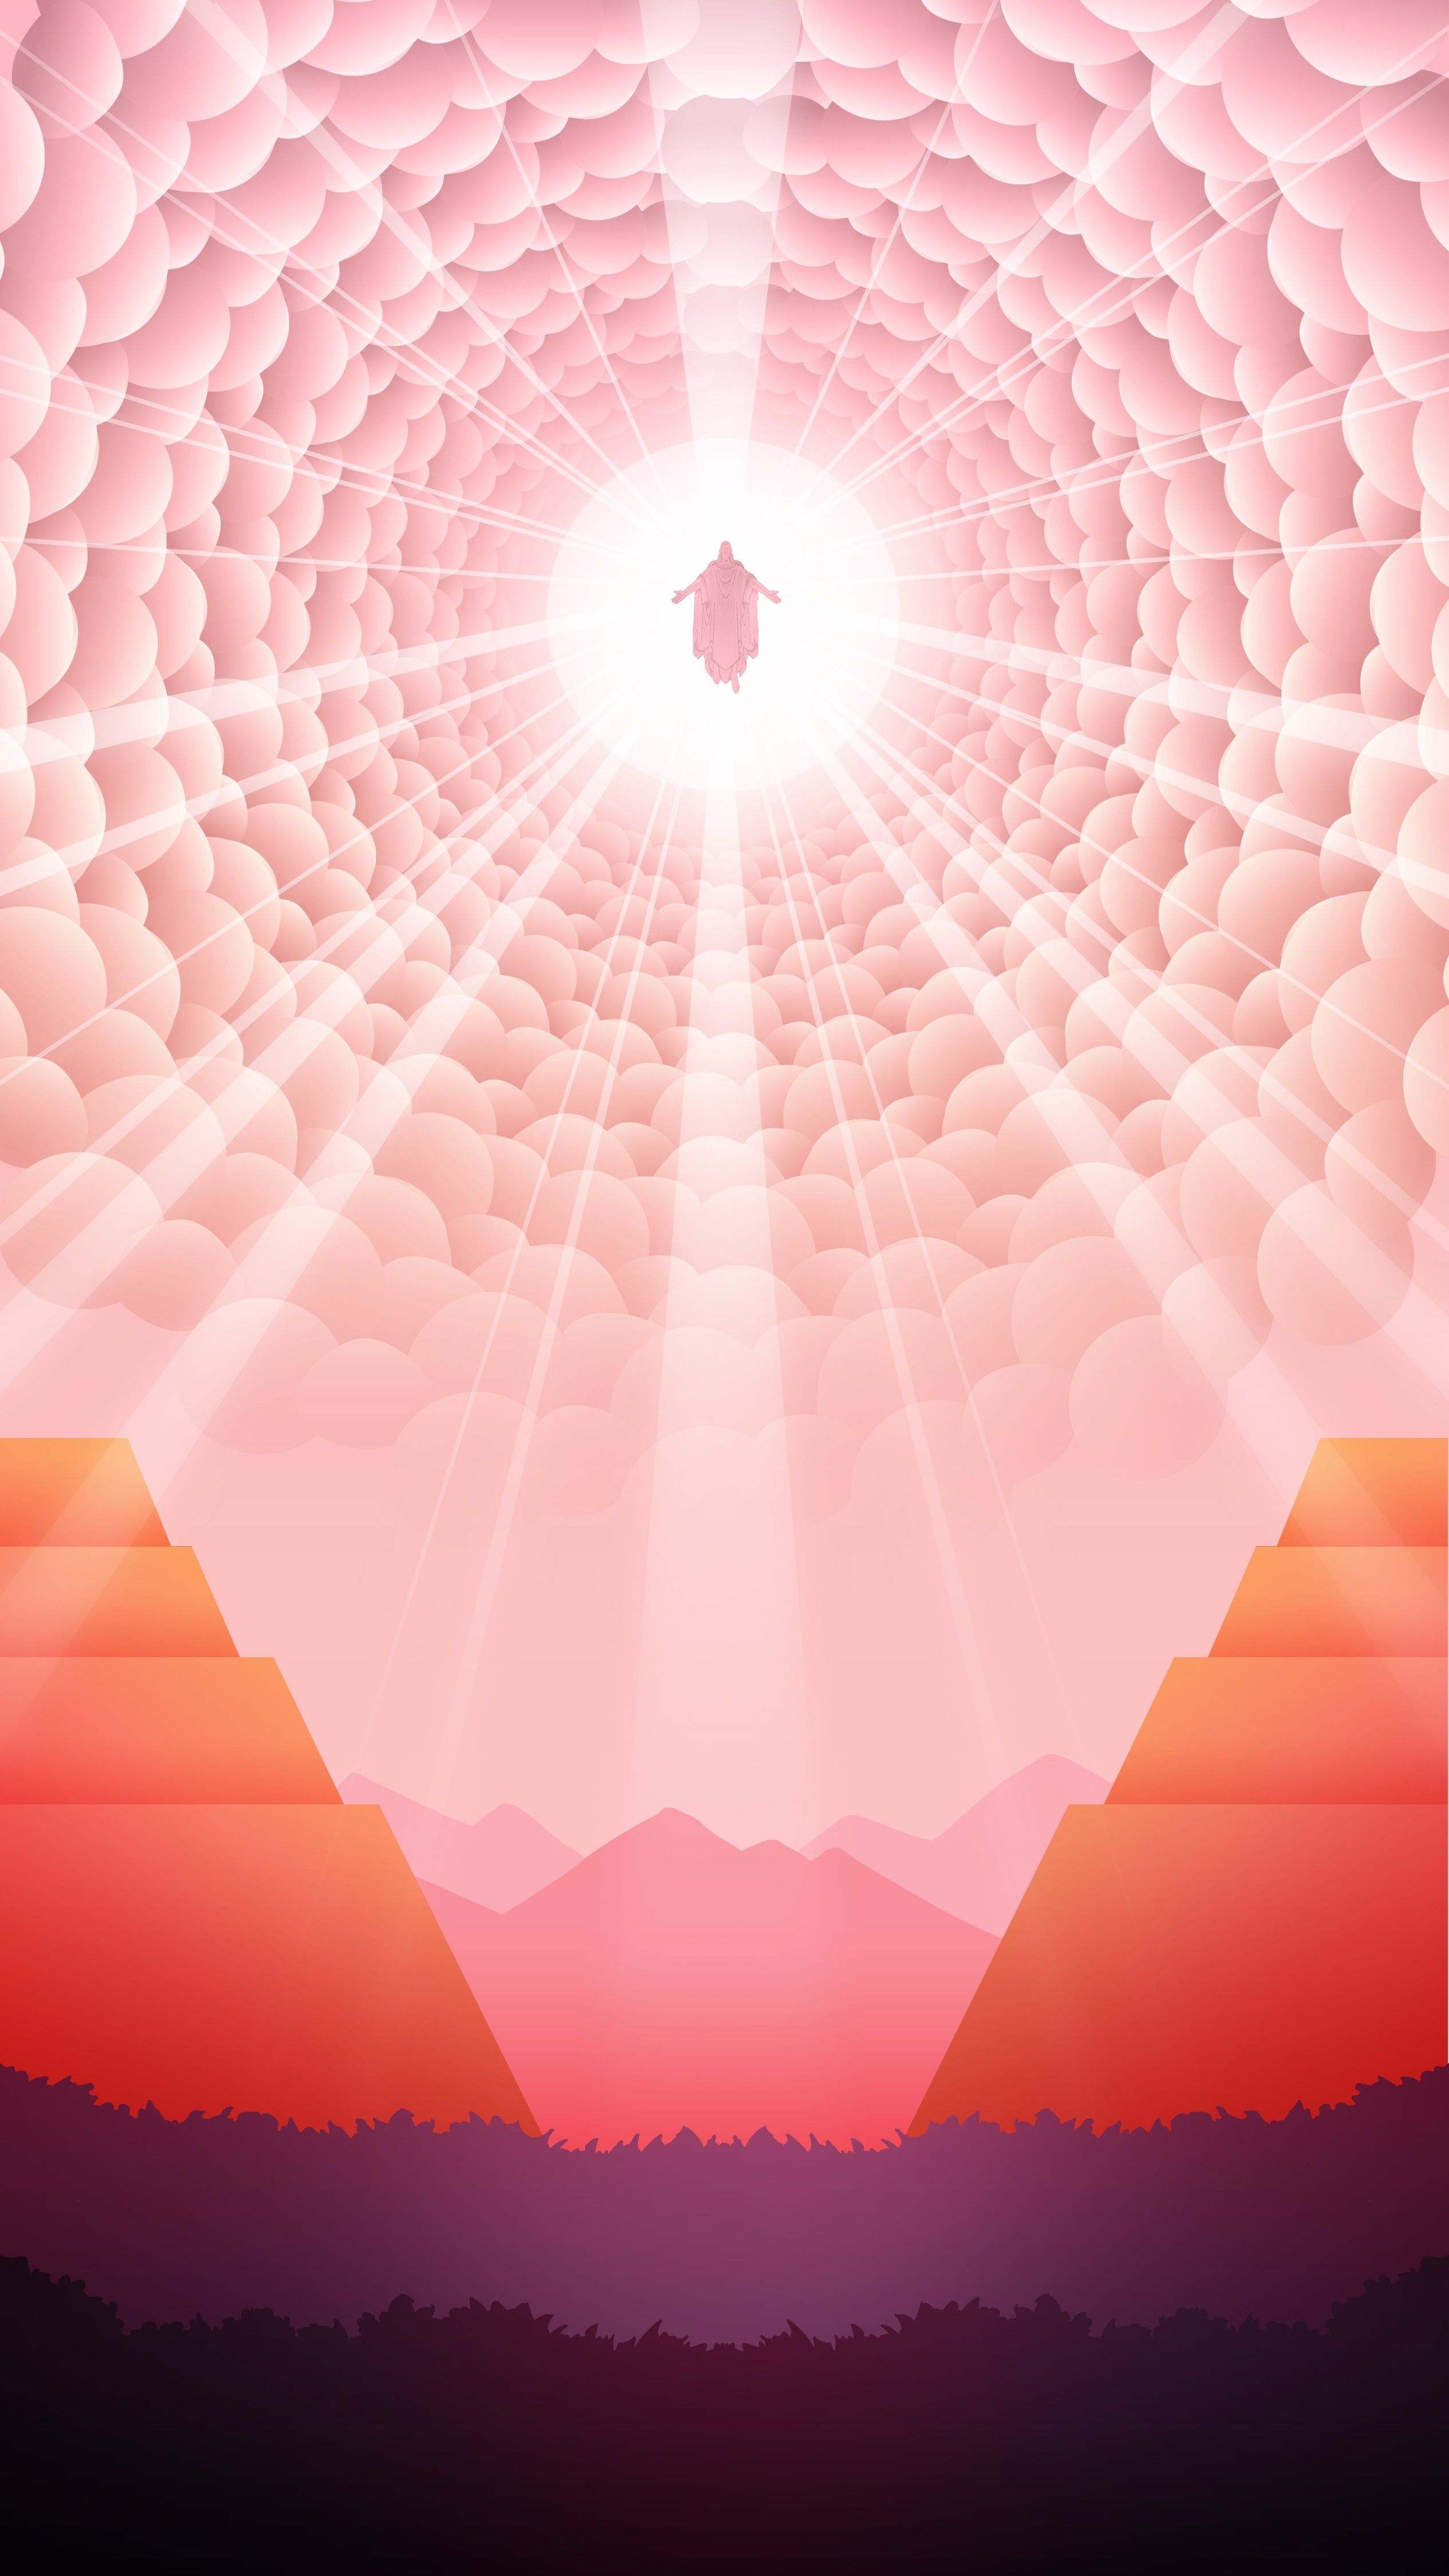 A person floating above clouds and mountains - Jesus